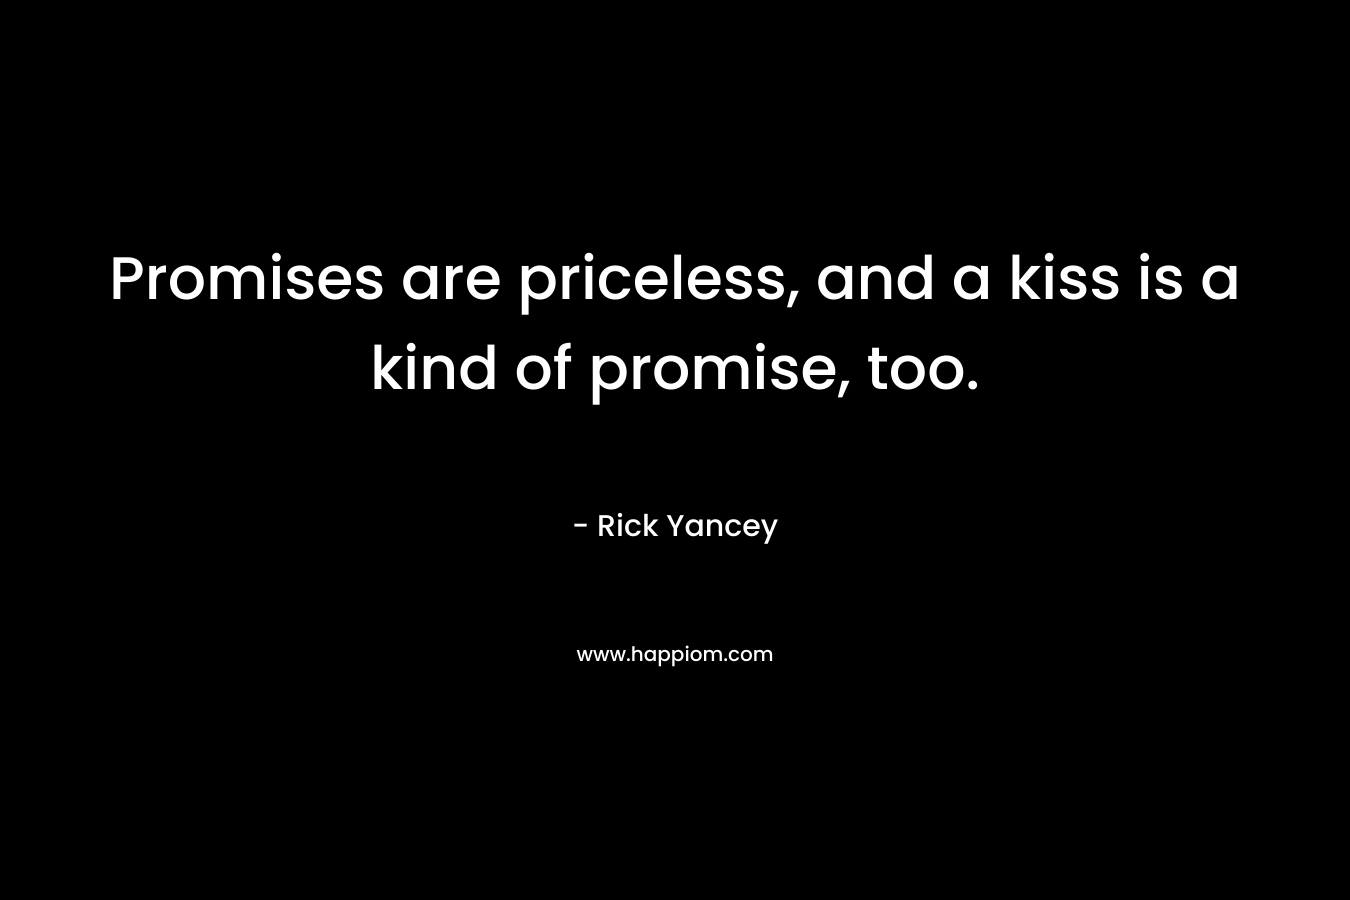 Promises are priceless, and a kiss is a kind of promise, too. – Rick Yancey